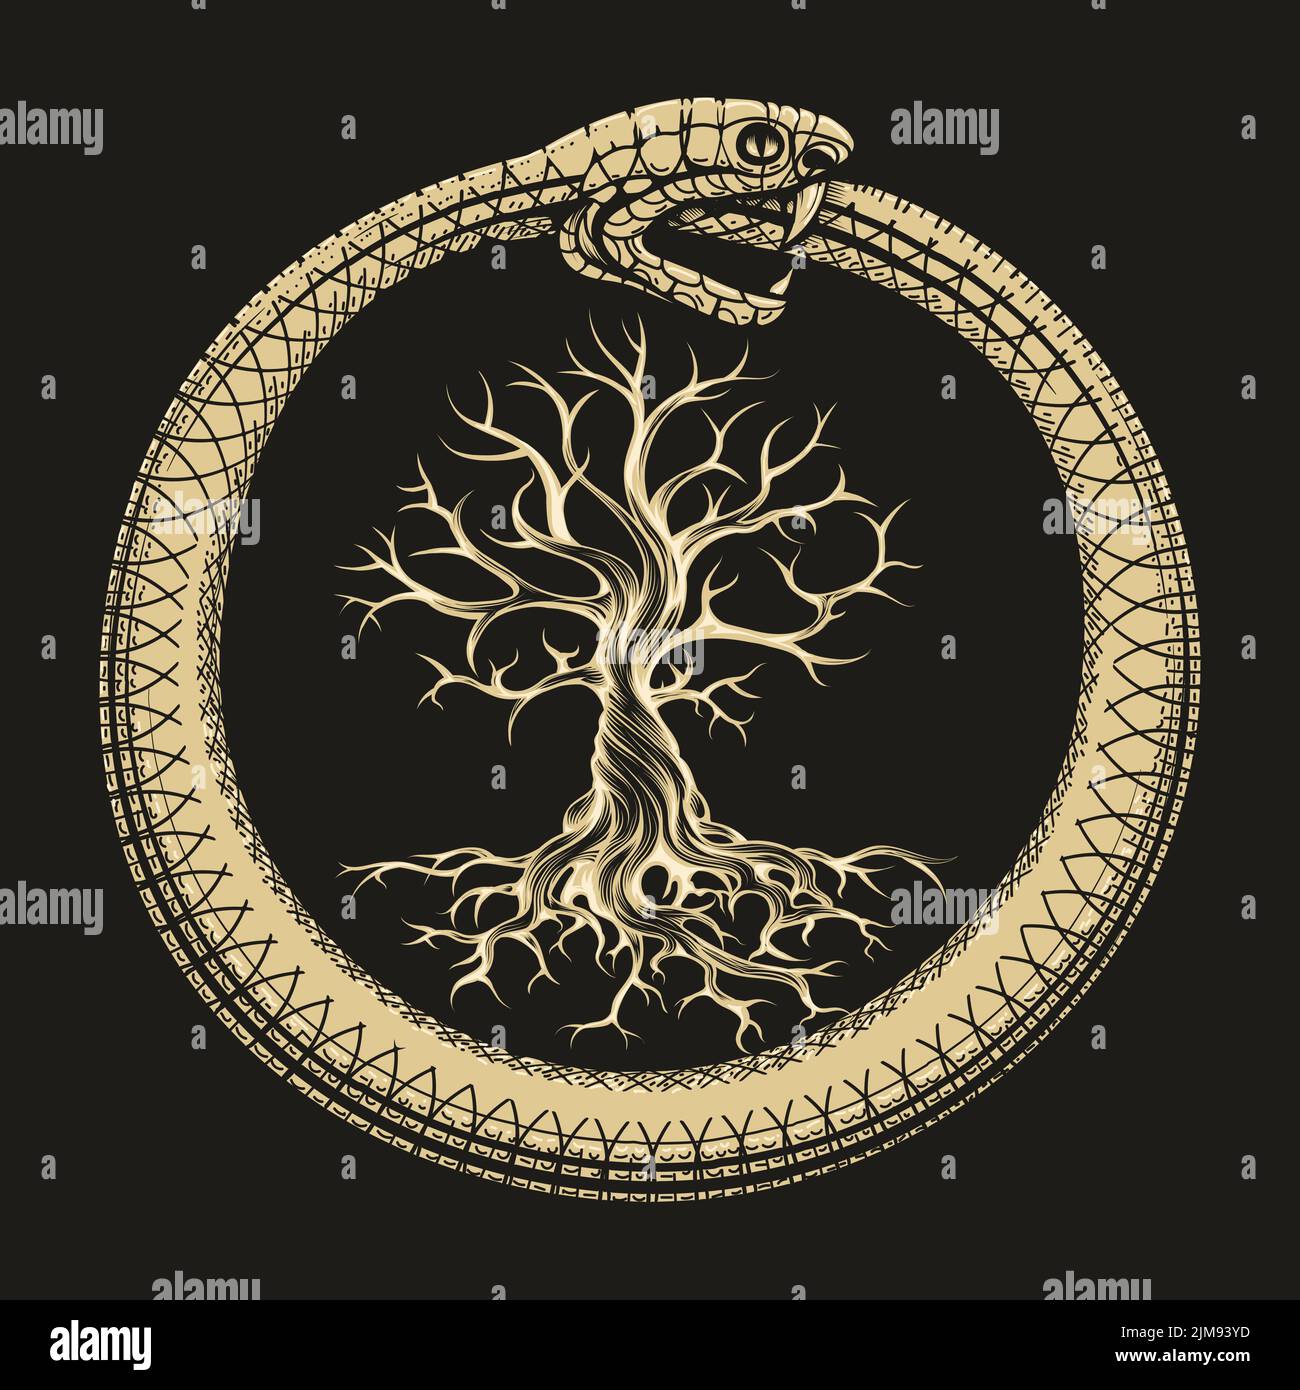 Esoteric Illustration of Ouroboros Snake And Tree of Life isolated on Black. Vector illustration. Stock Vector